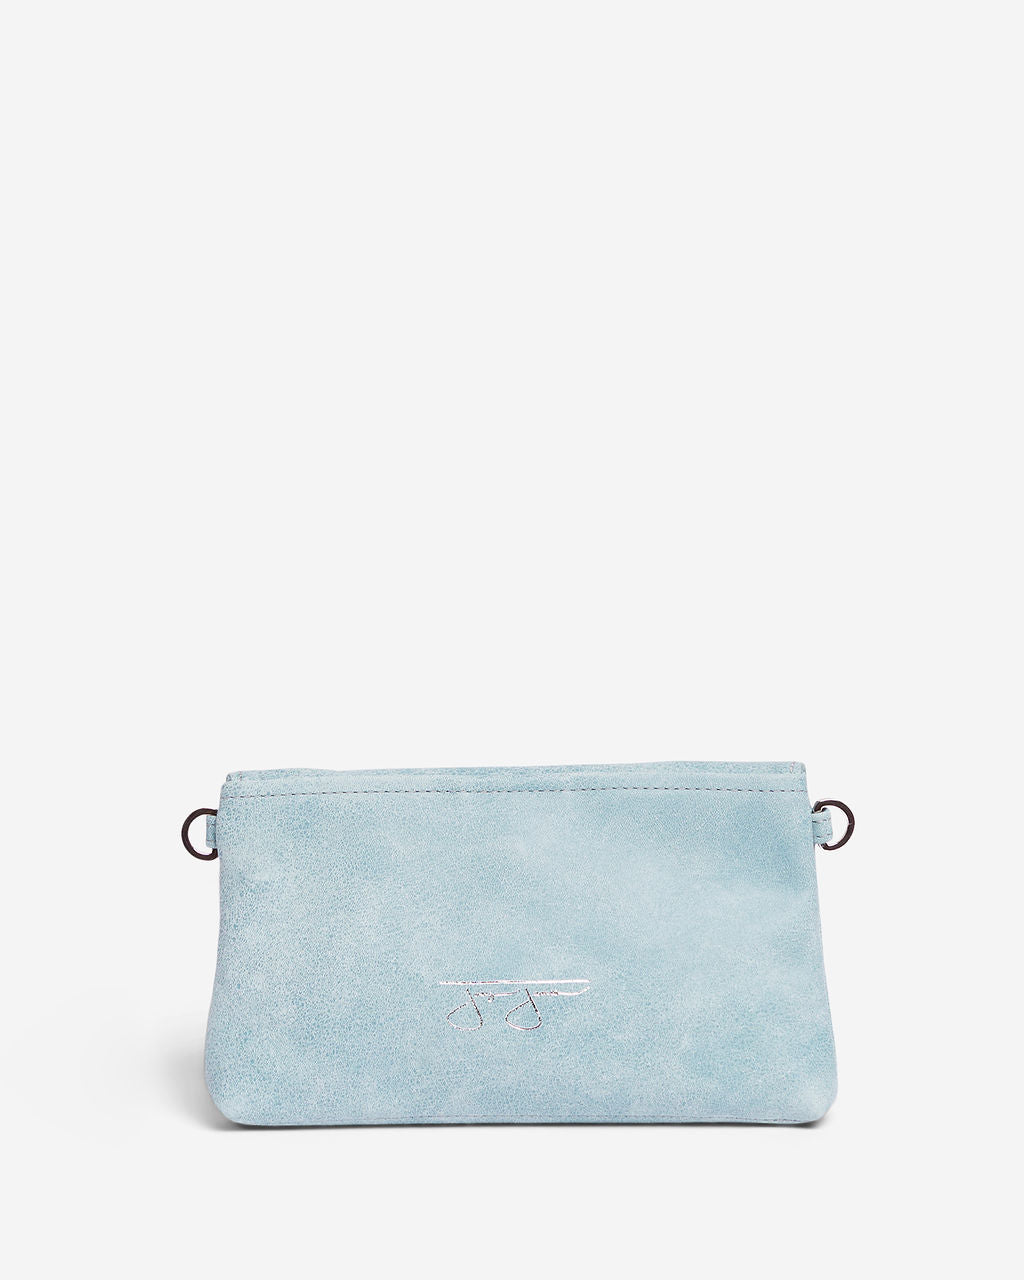 Norma Hipster Bag - Turquoise  Joey James, The Label   